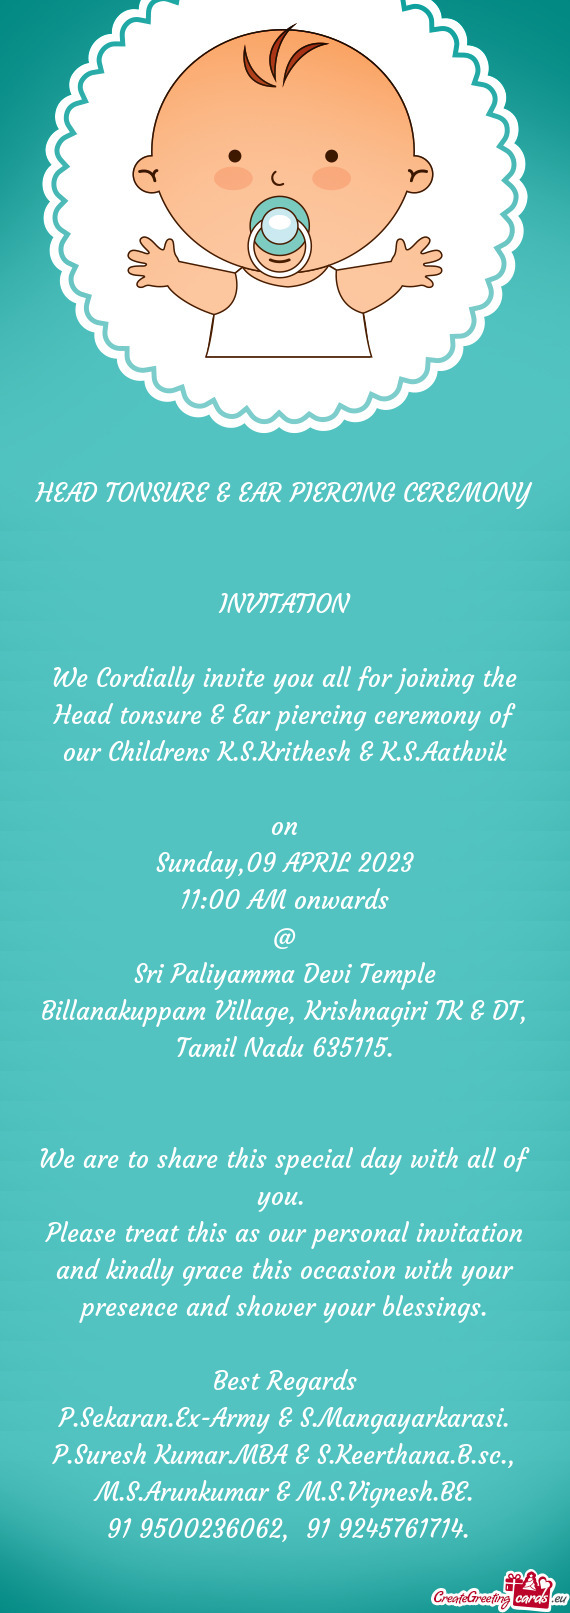 We Cordially invite you all for joining the Head tonsure & Ear piercing ceremony of our Childrens K